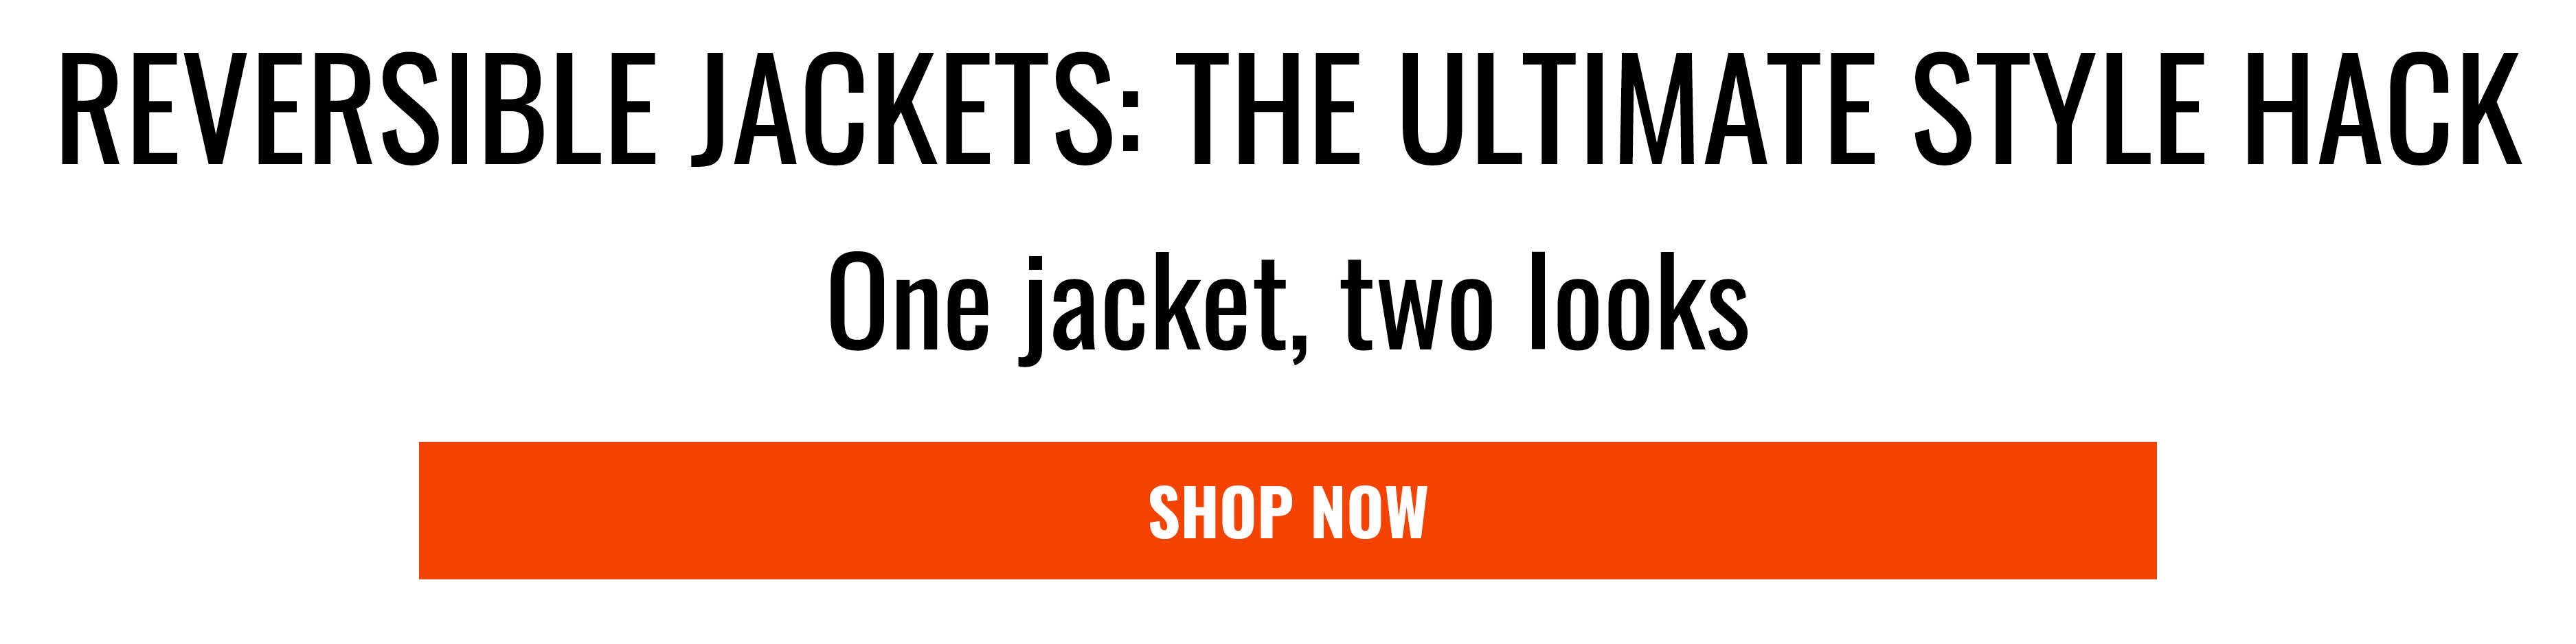 REVERSIBLE JACKETS: THE ULTIMATE STYLE HACK One jacket, two looks SHOP NOW